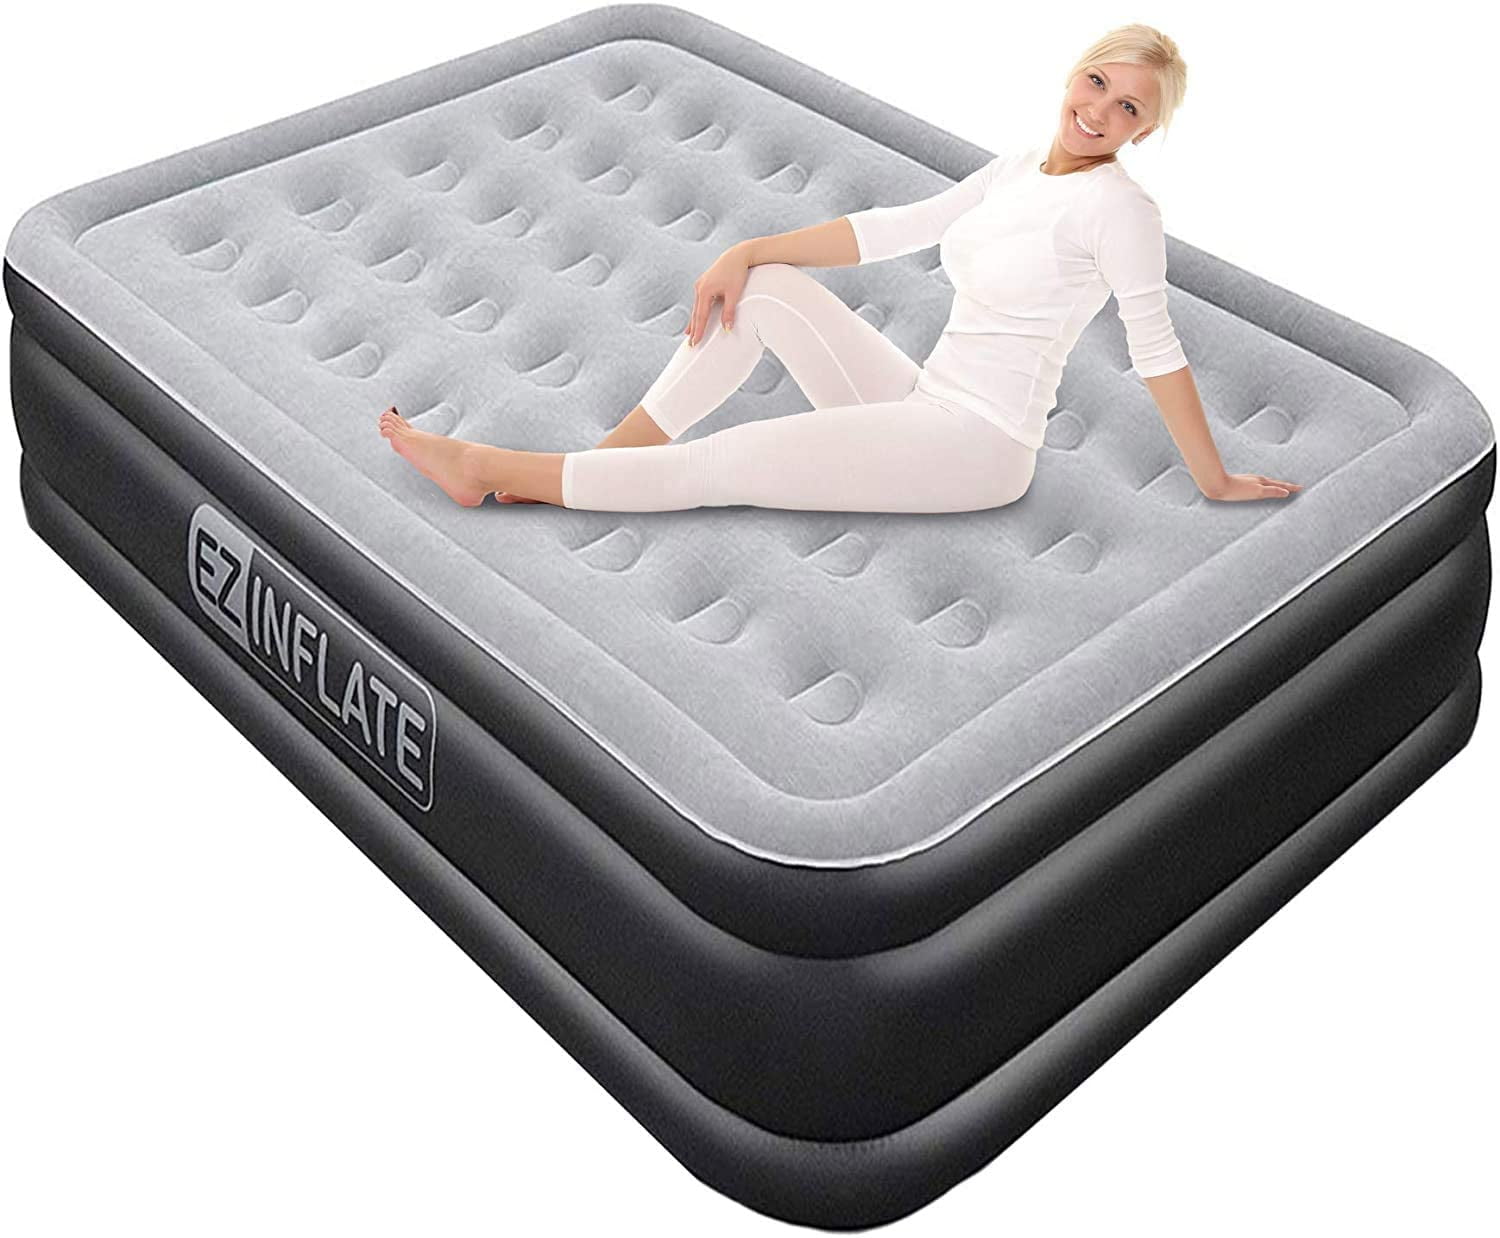 EZ INFLATE Luxury Double High Queen air Mattress with 